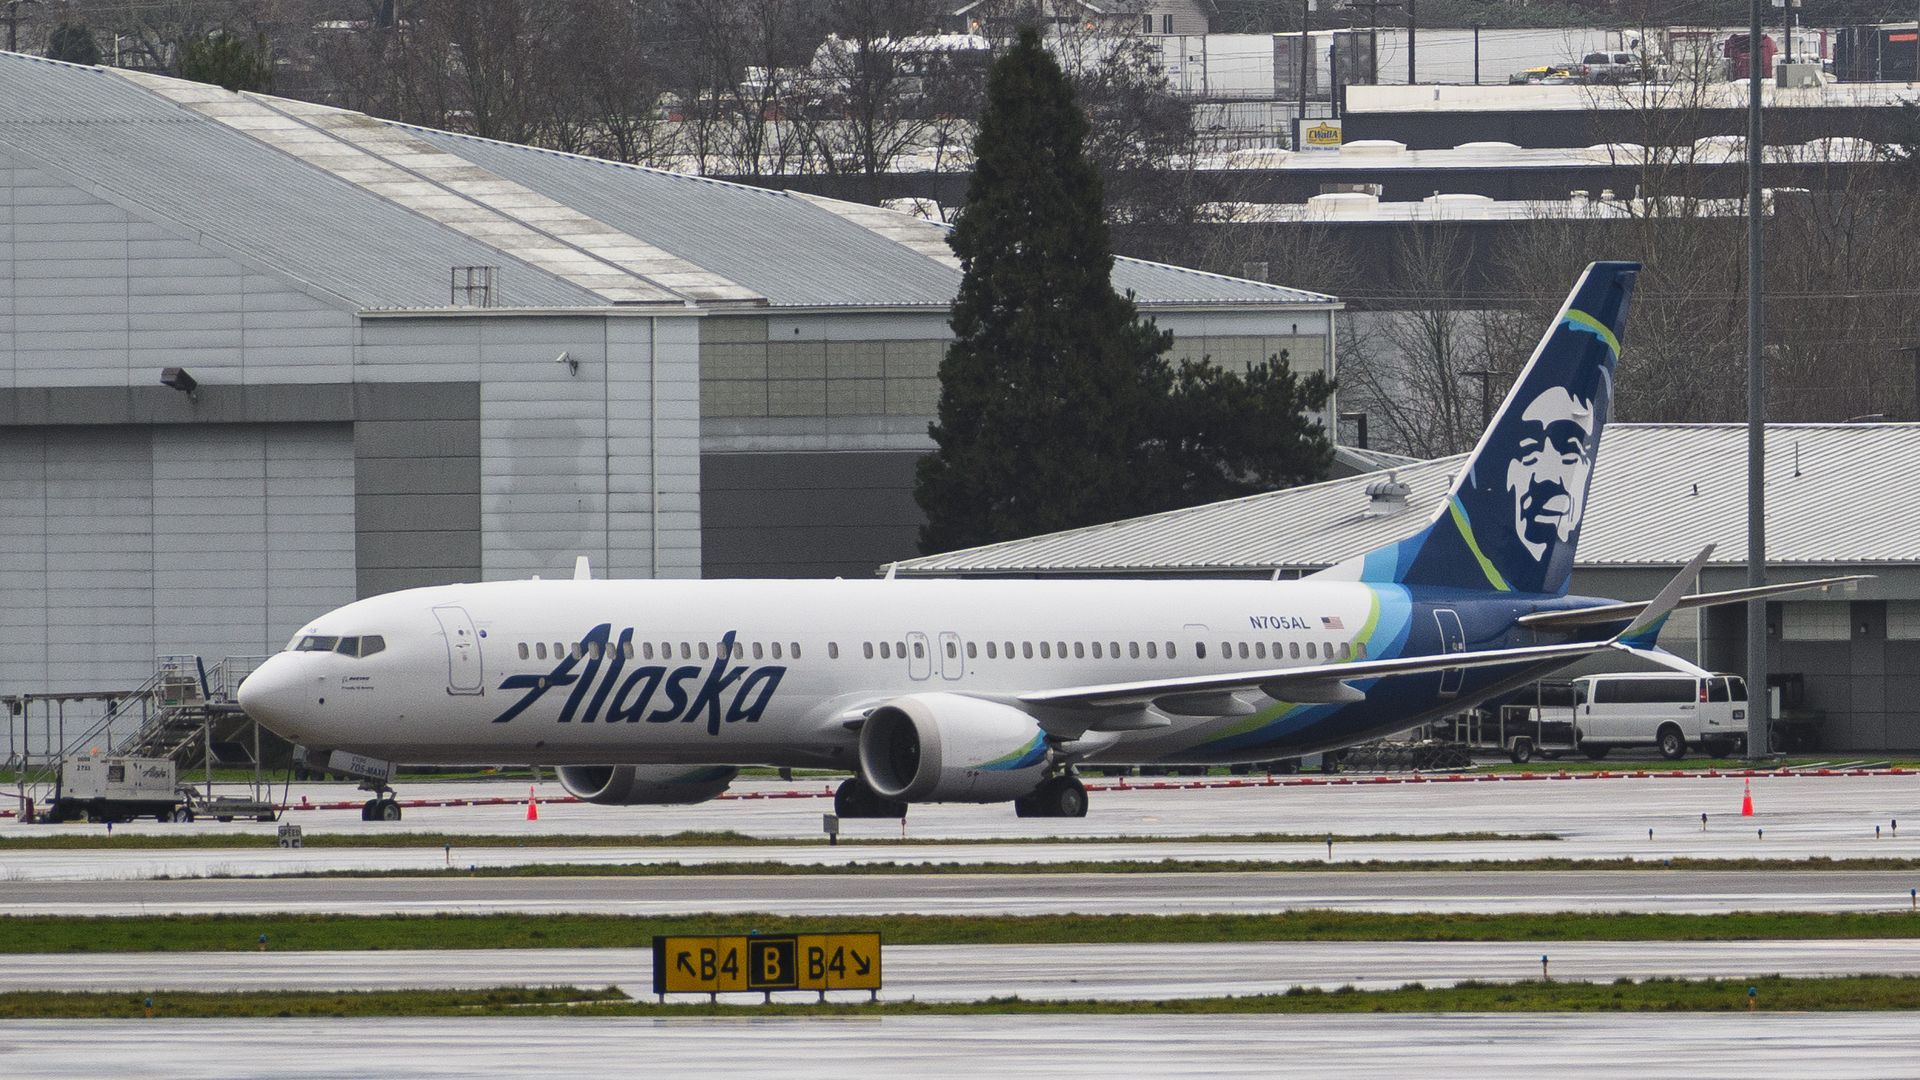 An Alaska Airlines plane on the ground